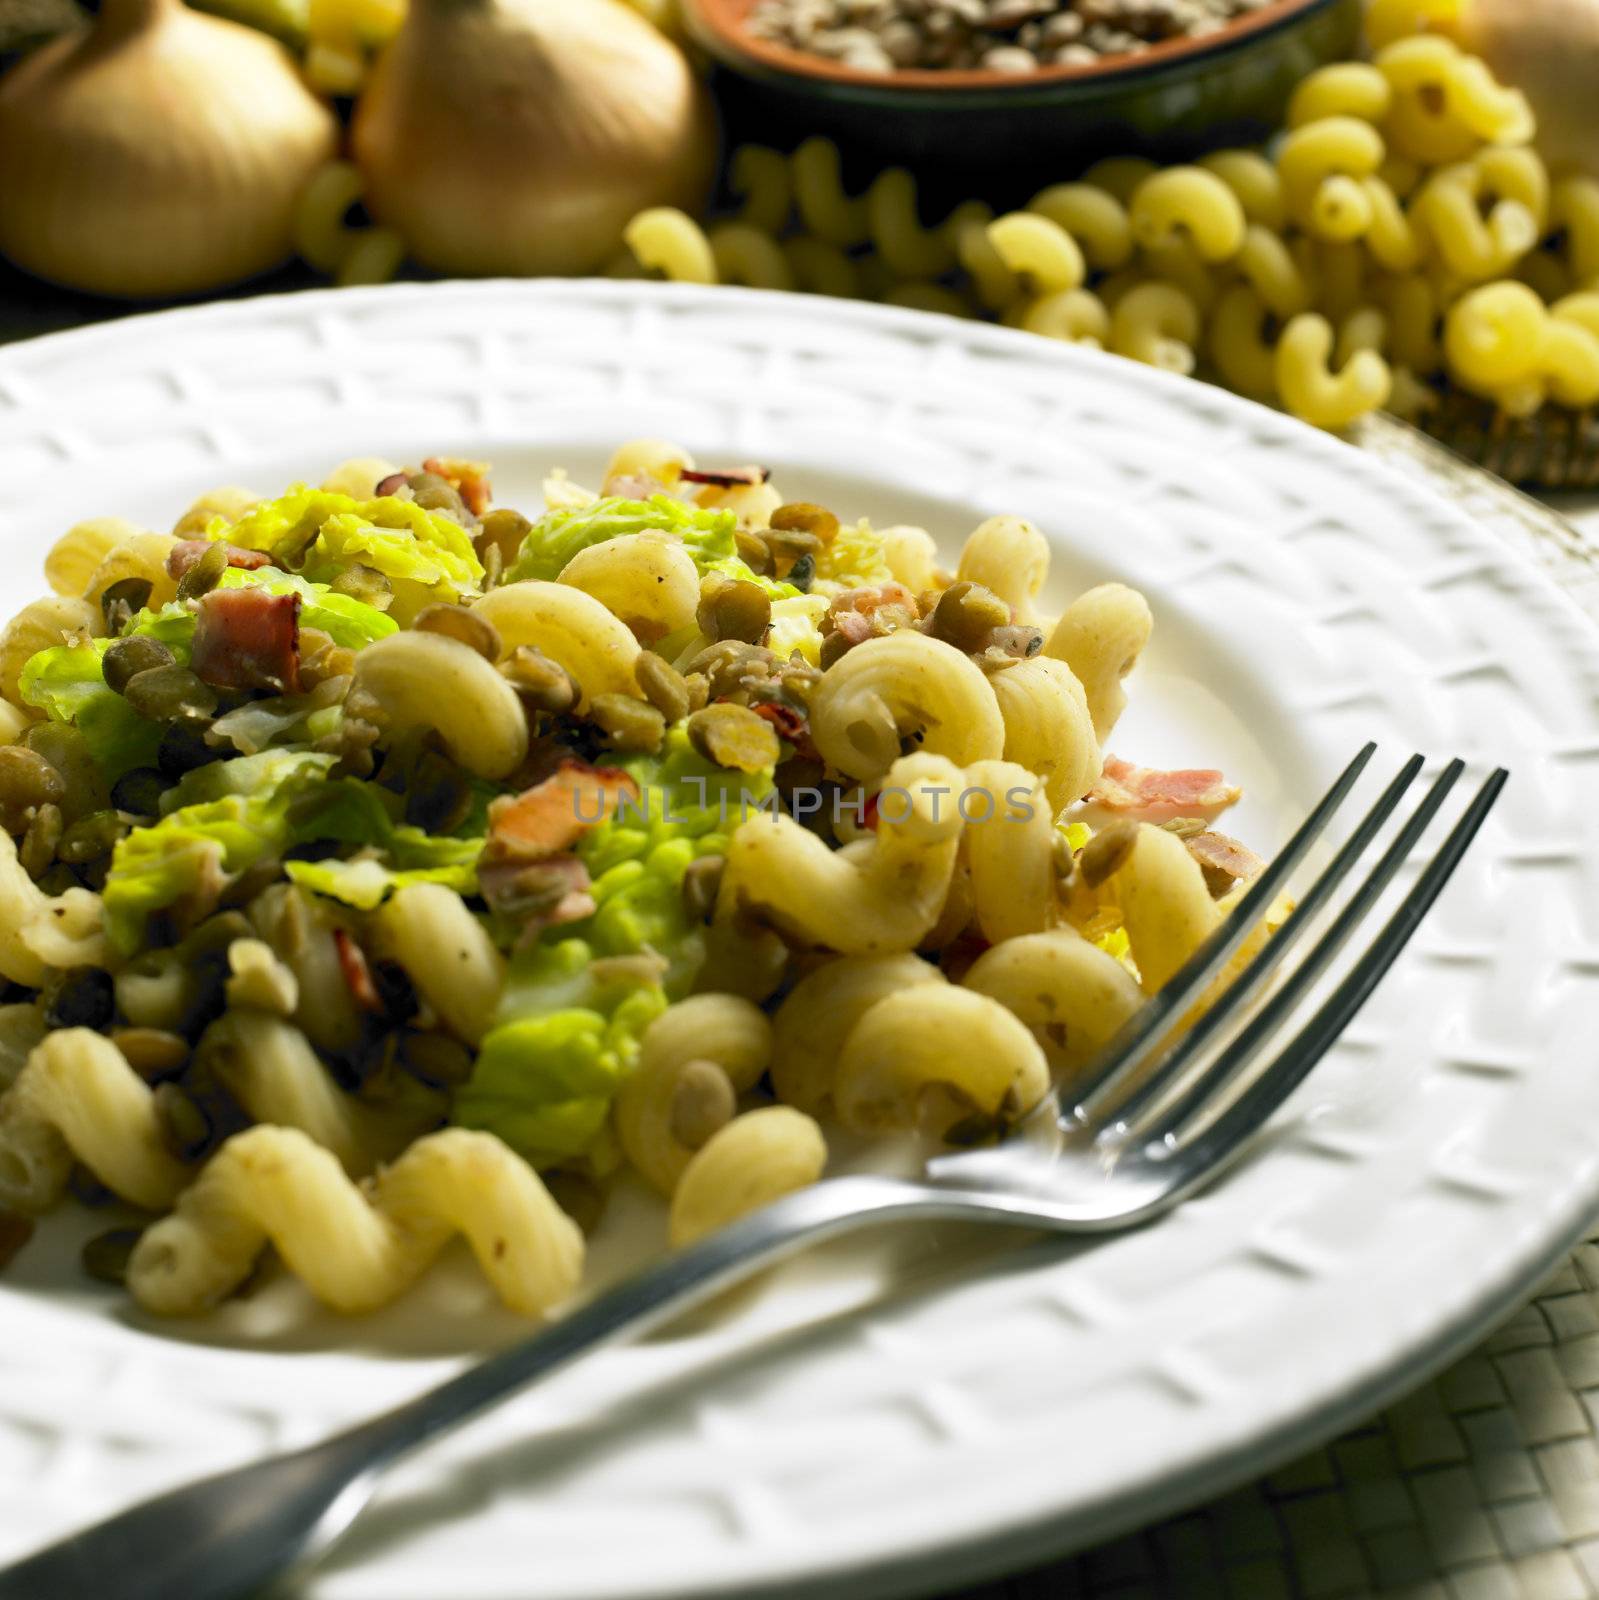 pasta with lentil and savoy cabbage by phbcz